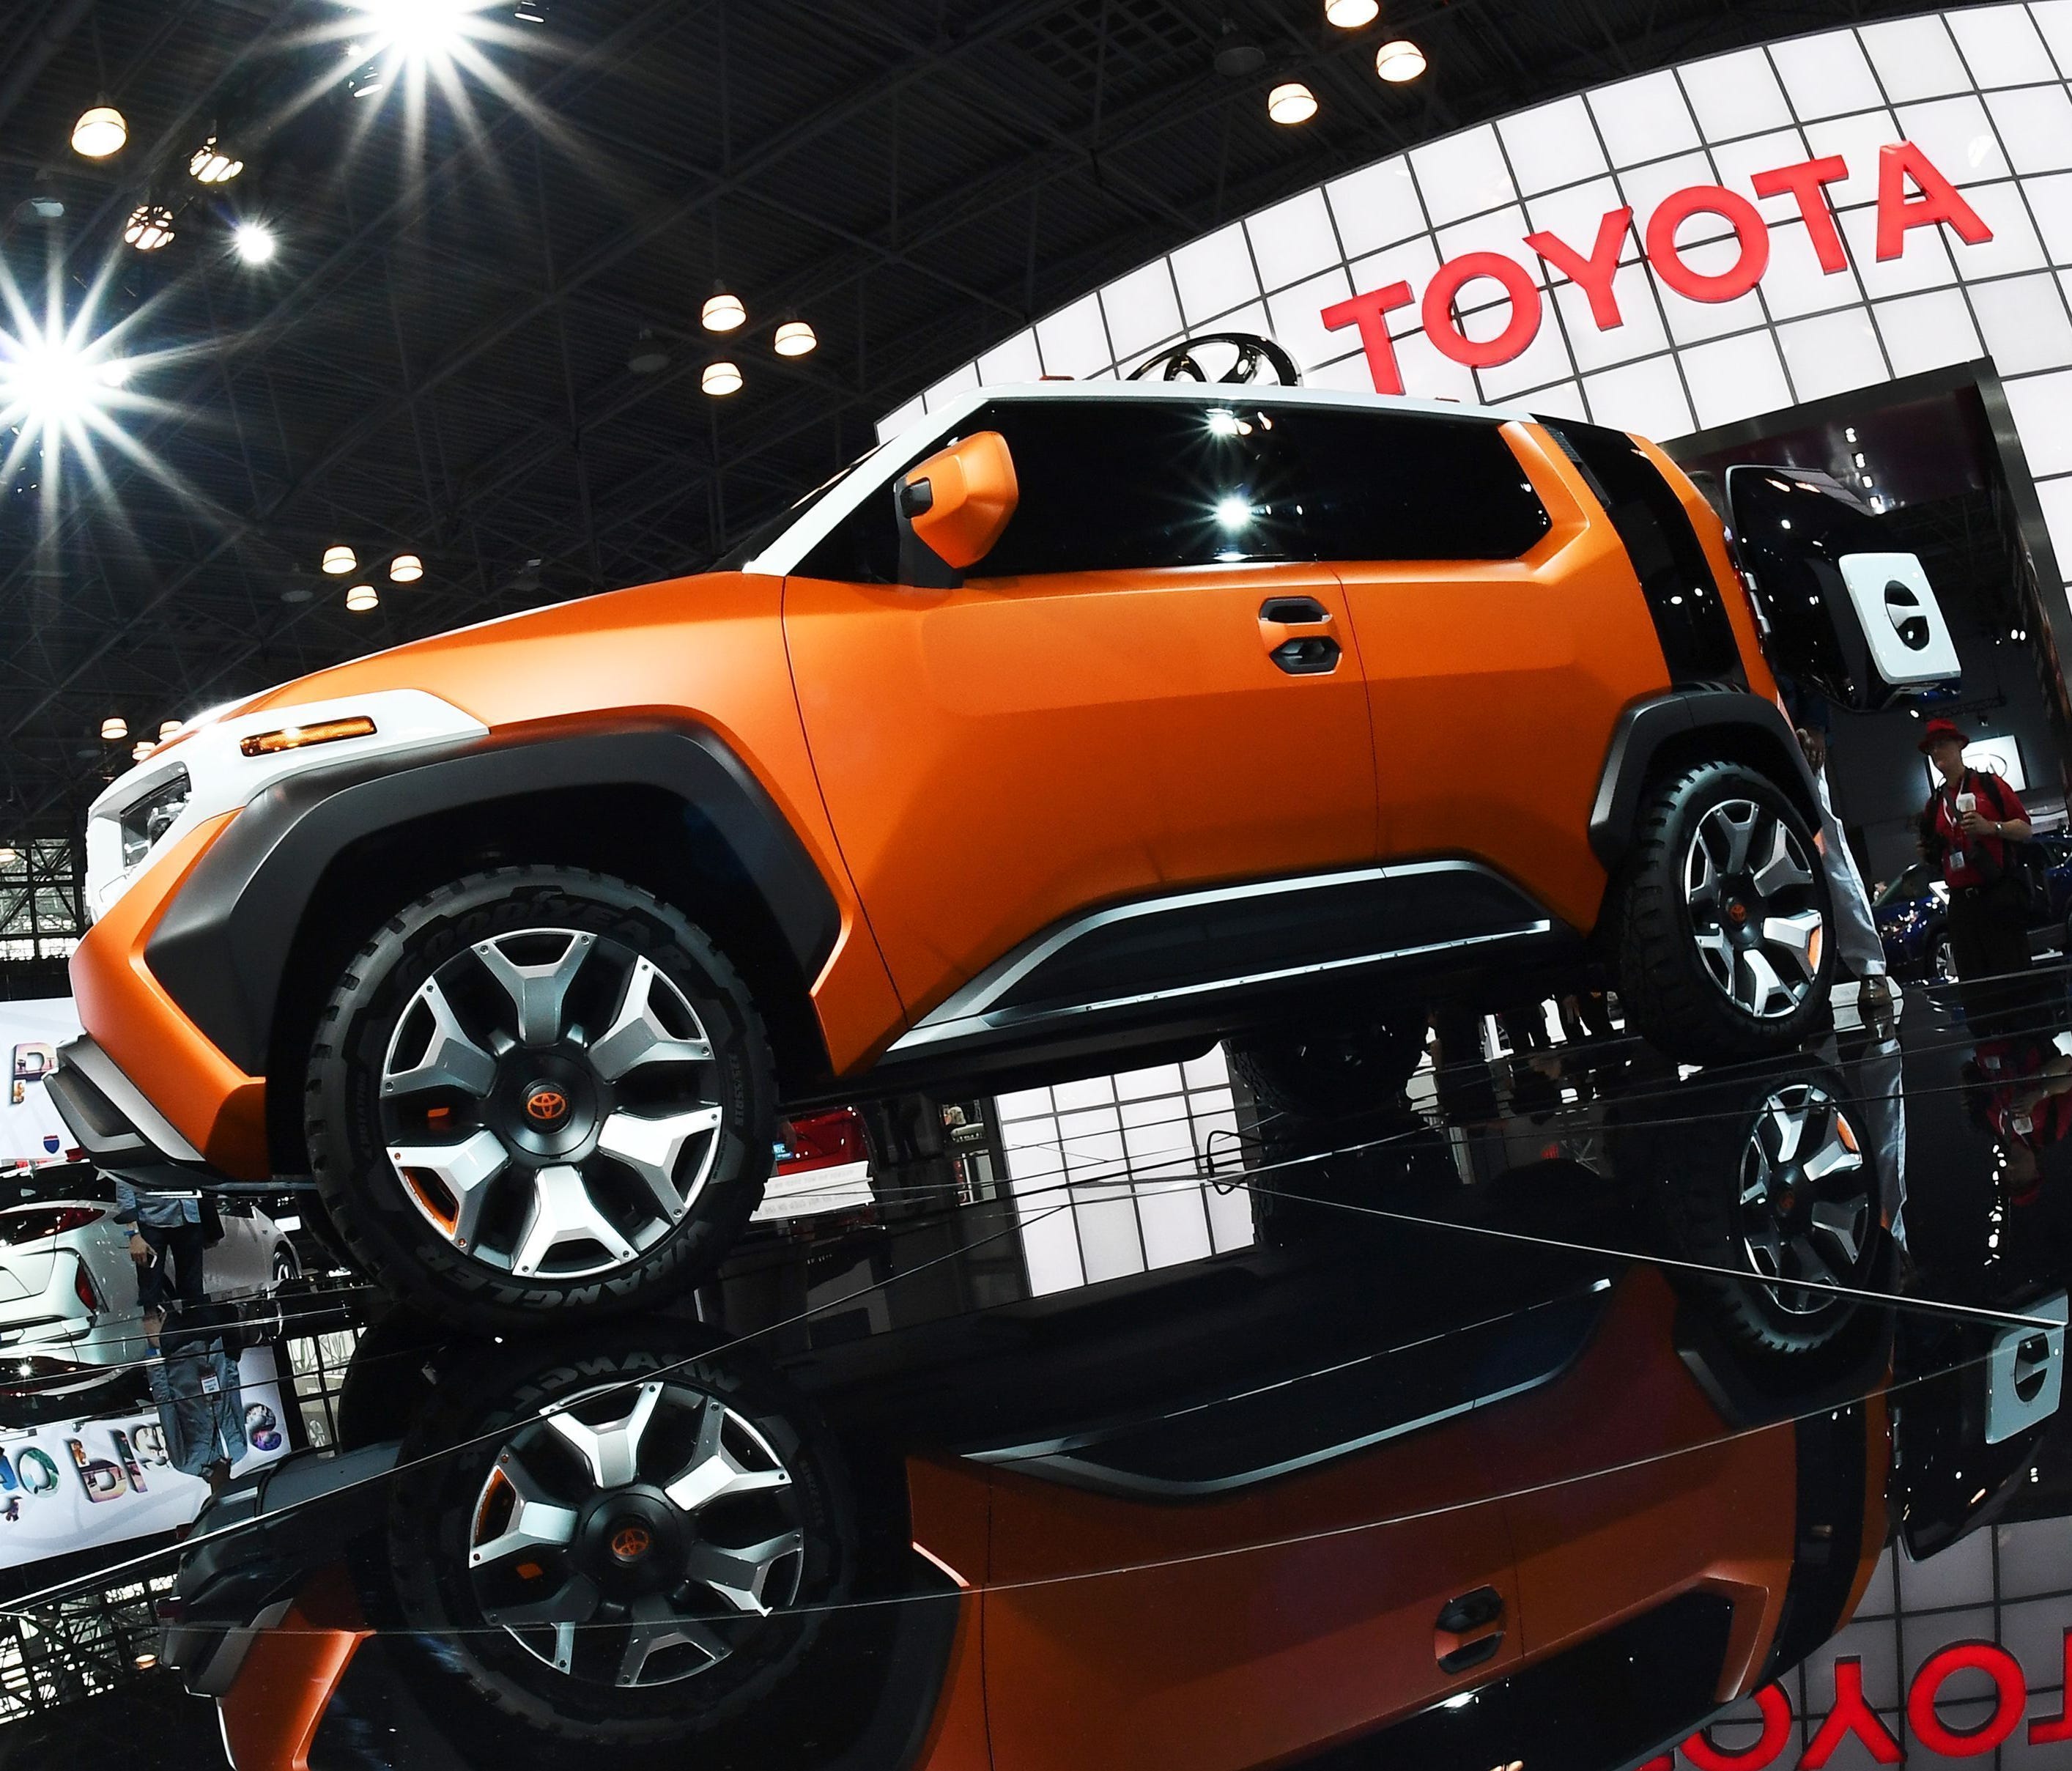 The Toyota FT-4X concept car is displayed during the New York International Auto Show in New York City.